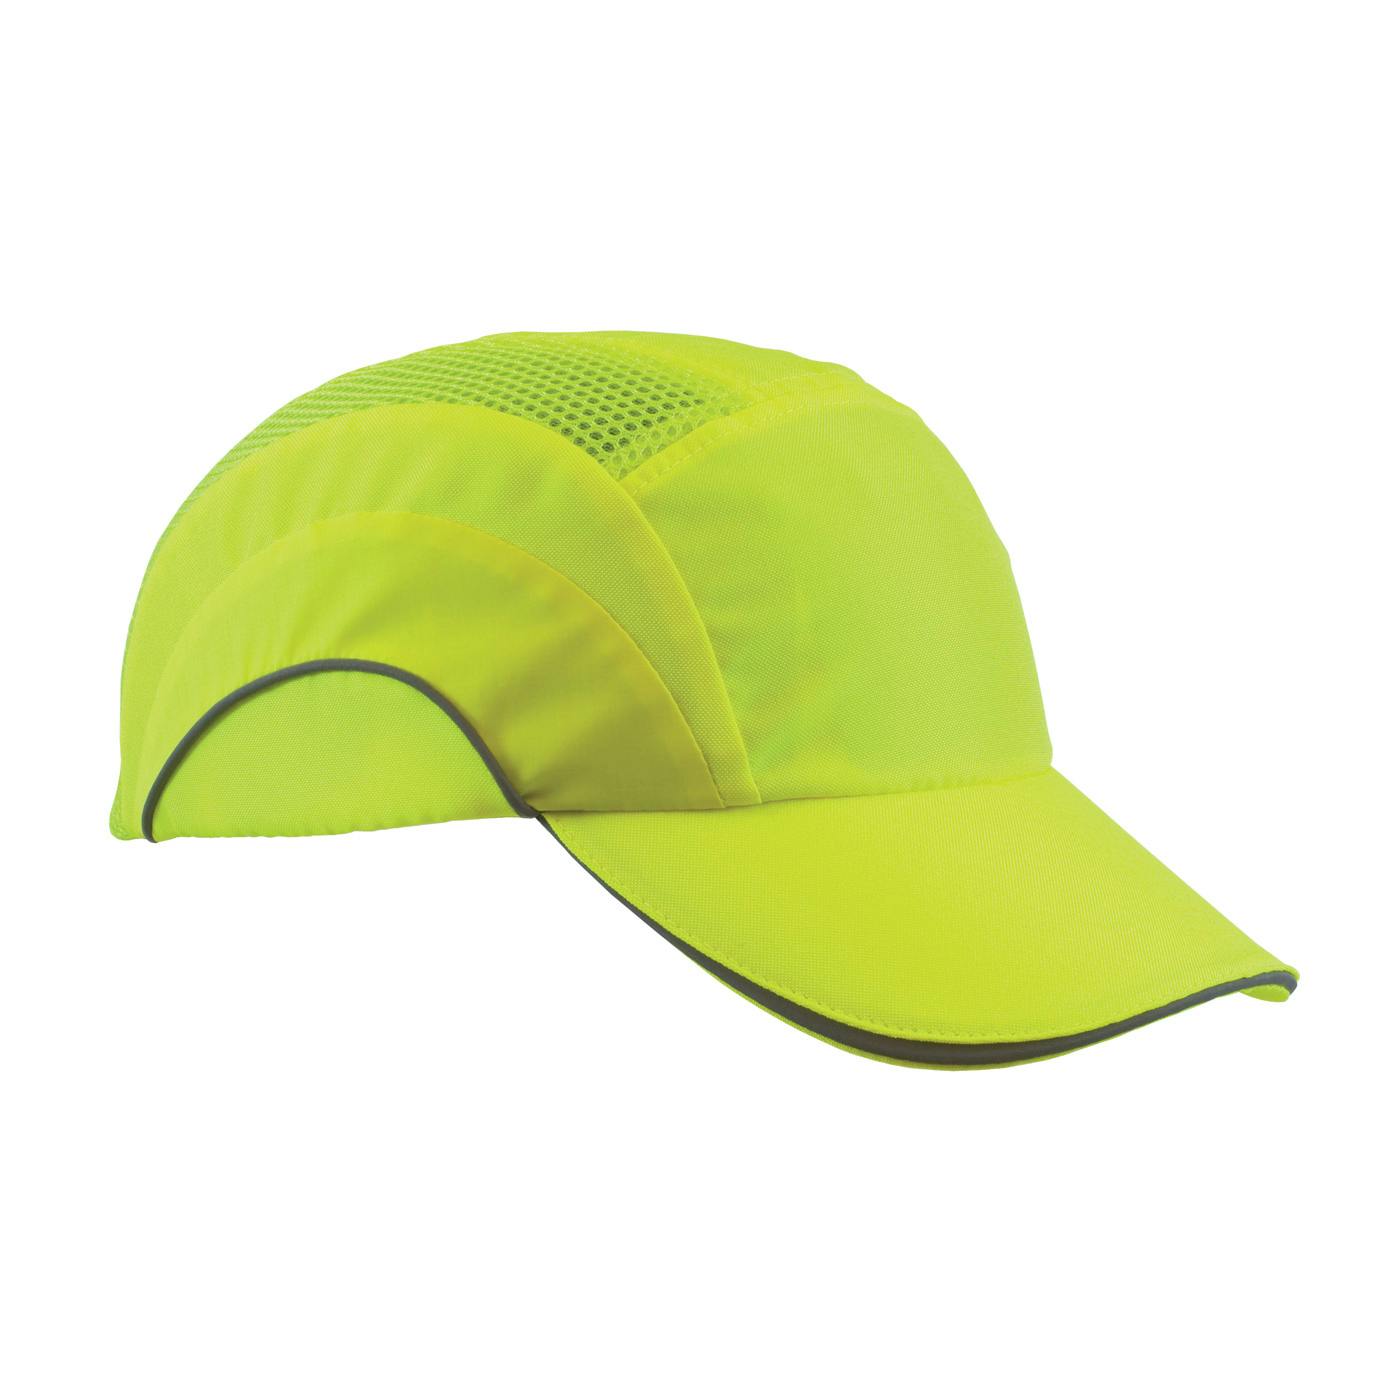 Hi-Vis Baseball Style Bump Cap with HDPE Protective Liner and Adjustable Back, Hi-Vis Yellow (282-ABR170-LY) - OS_0